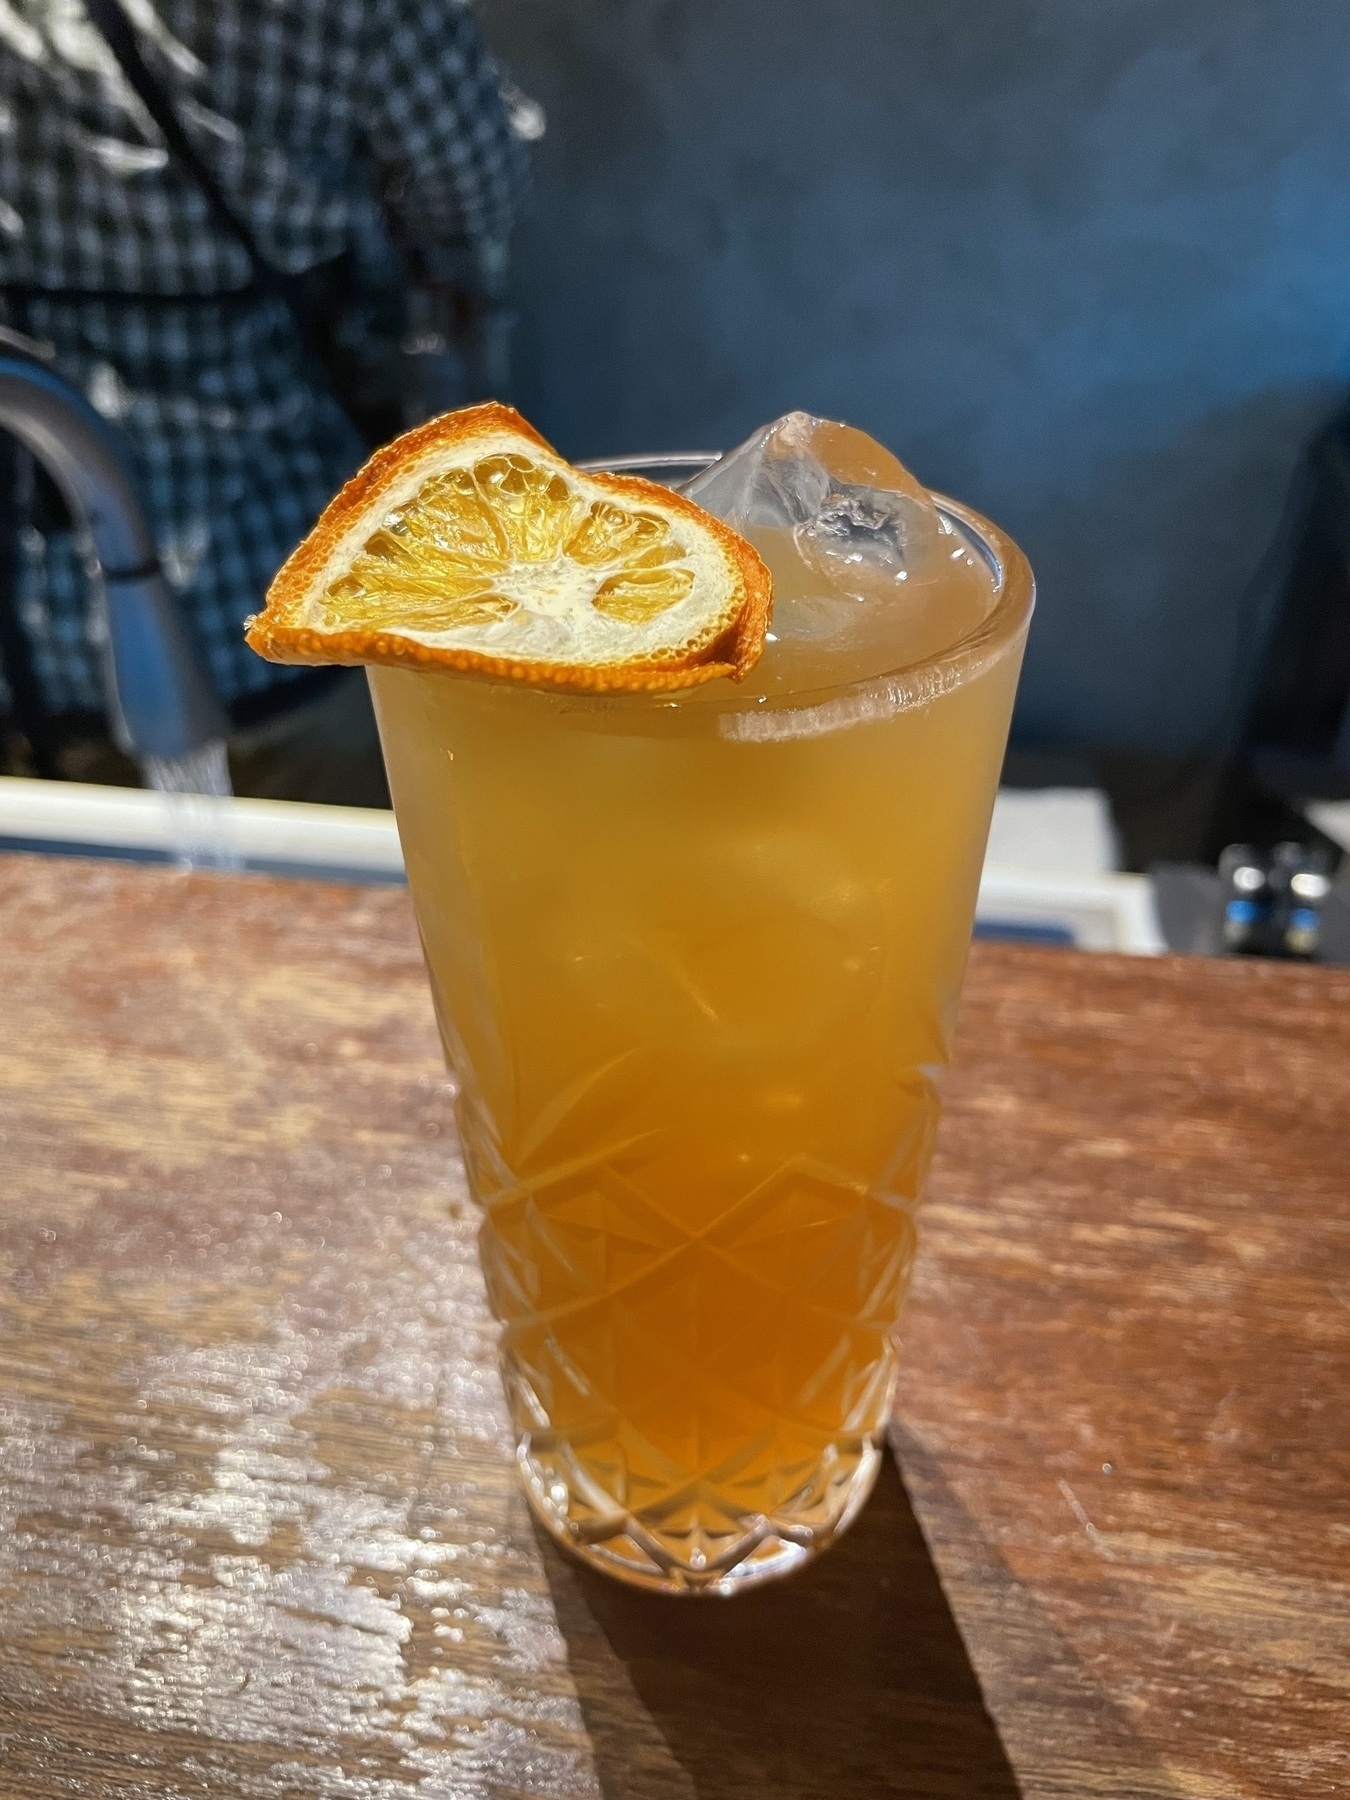 A mixed orange cocktail in a tall glass with a dried orange as a garnish, with ice in the drink as well.